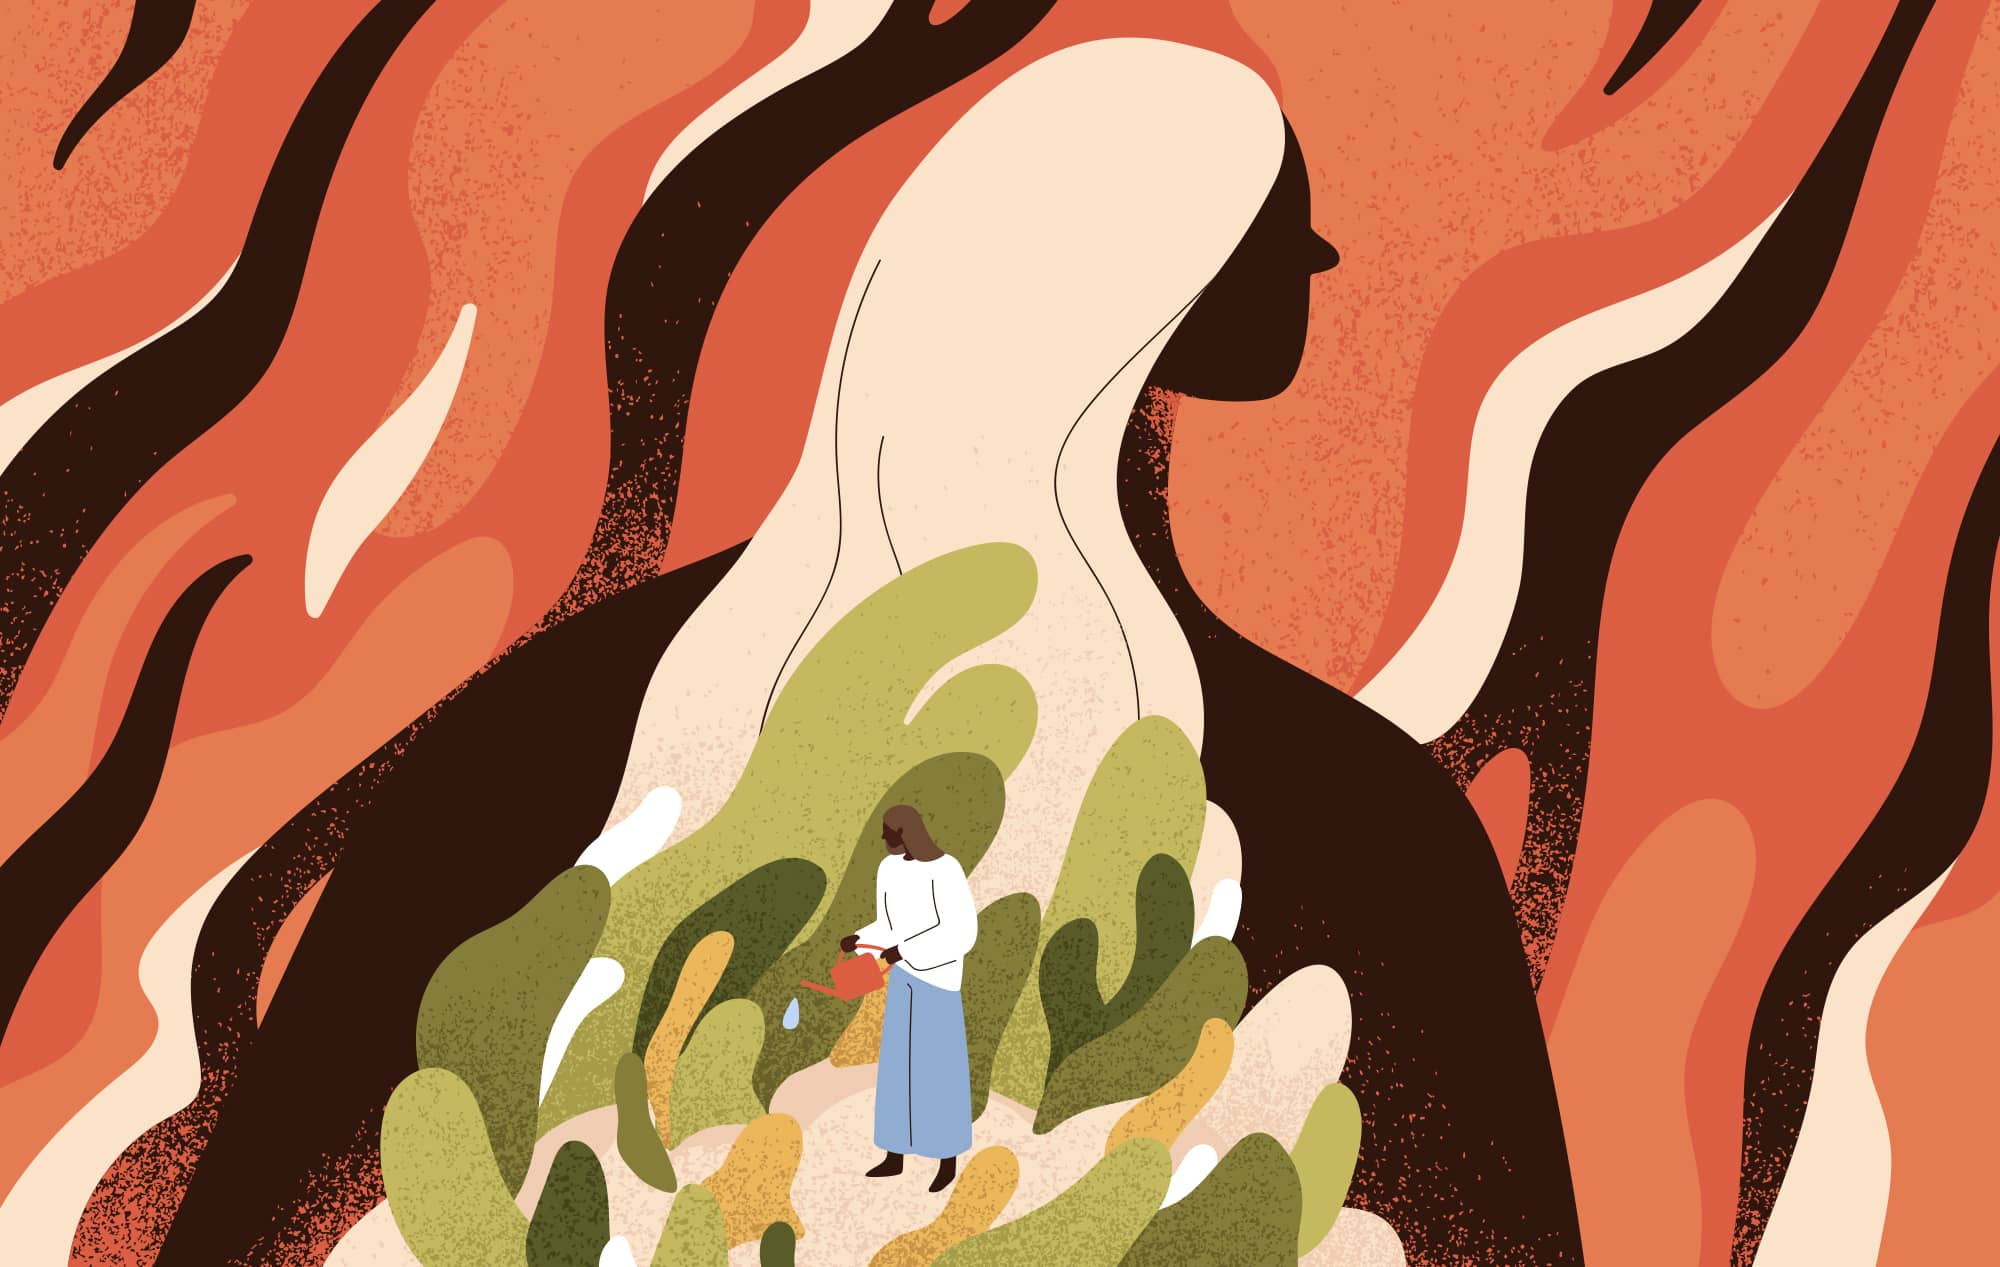 Illustration of a person working on their mental health; a large silhouette of them is the center of the image and inside the silhouette is a smaller version of them growing a garden.